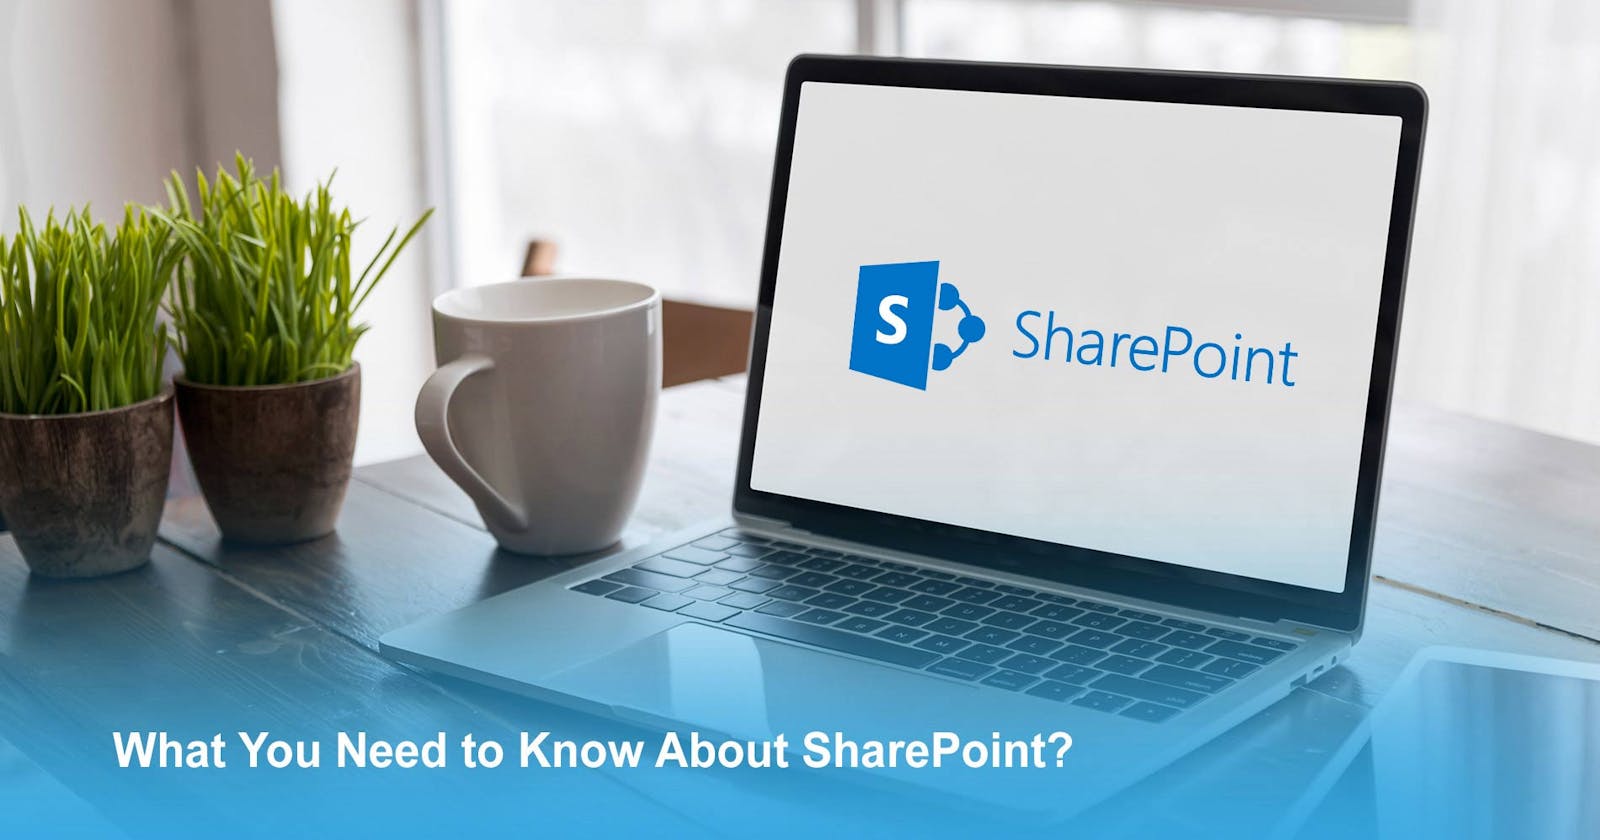 Everything you ever wanted to know about SharePoint